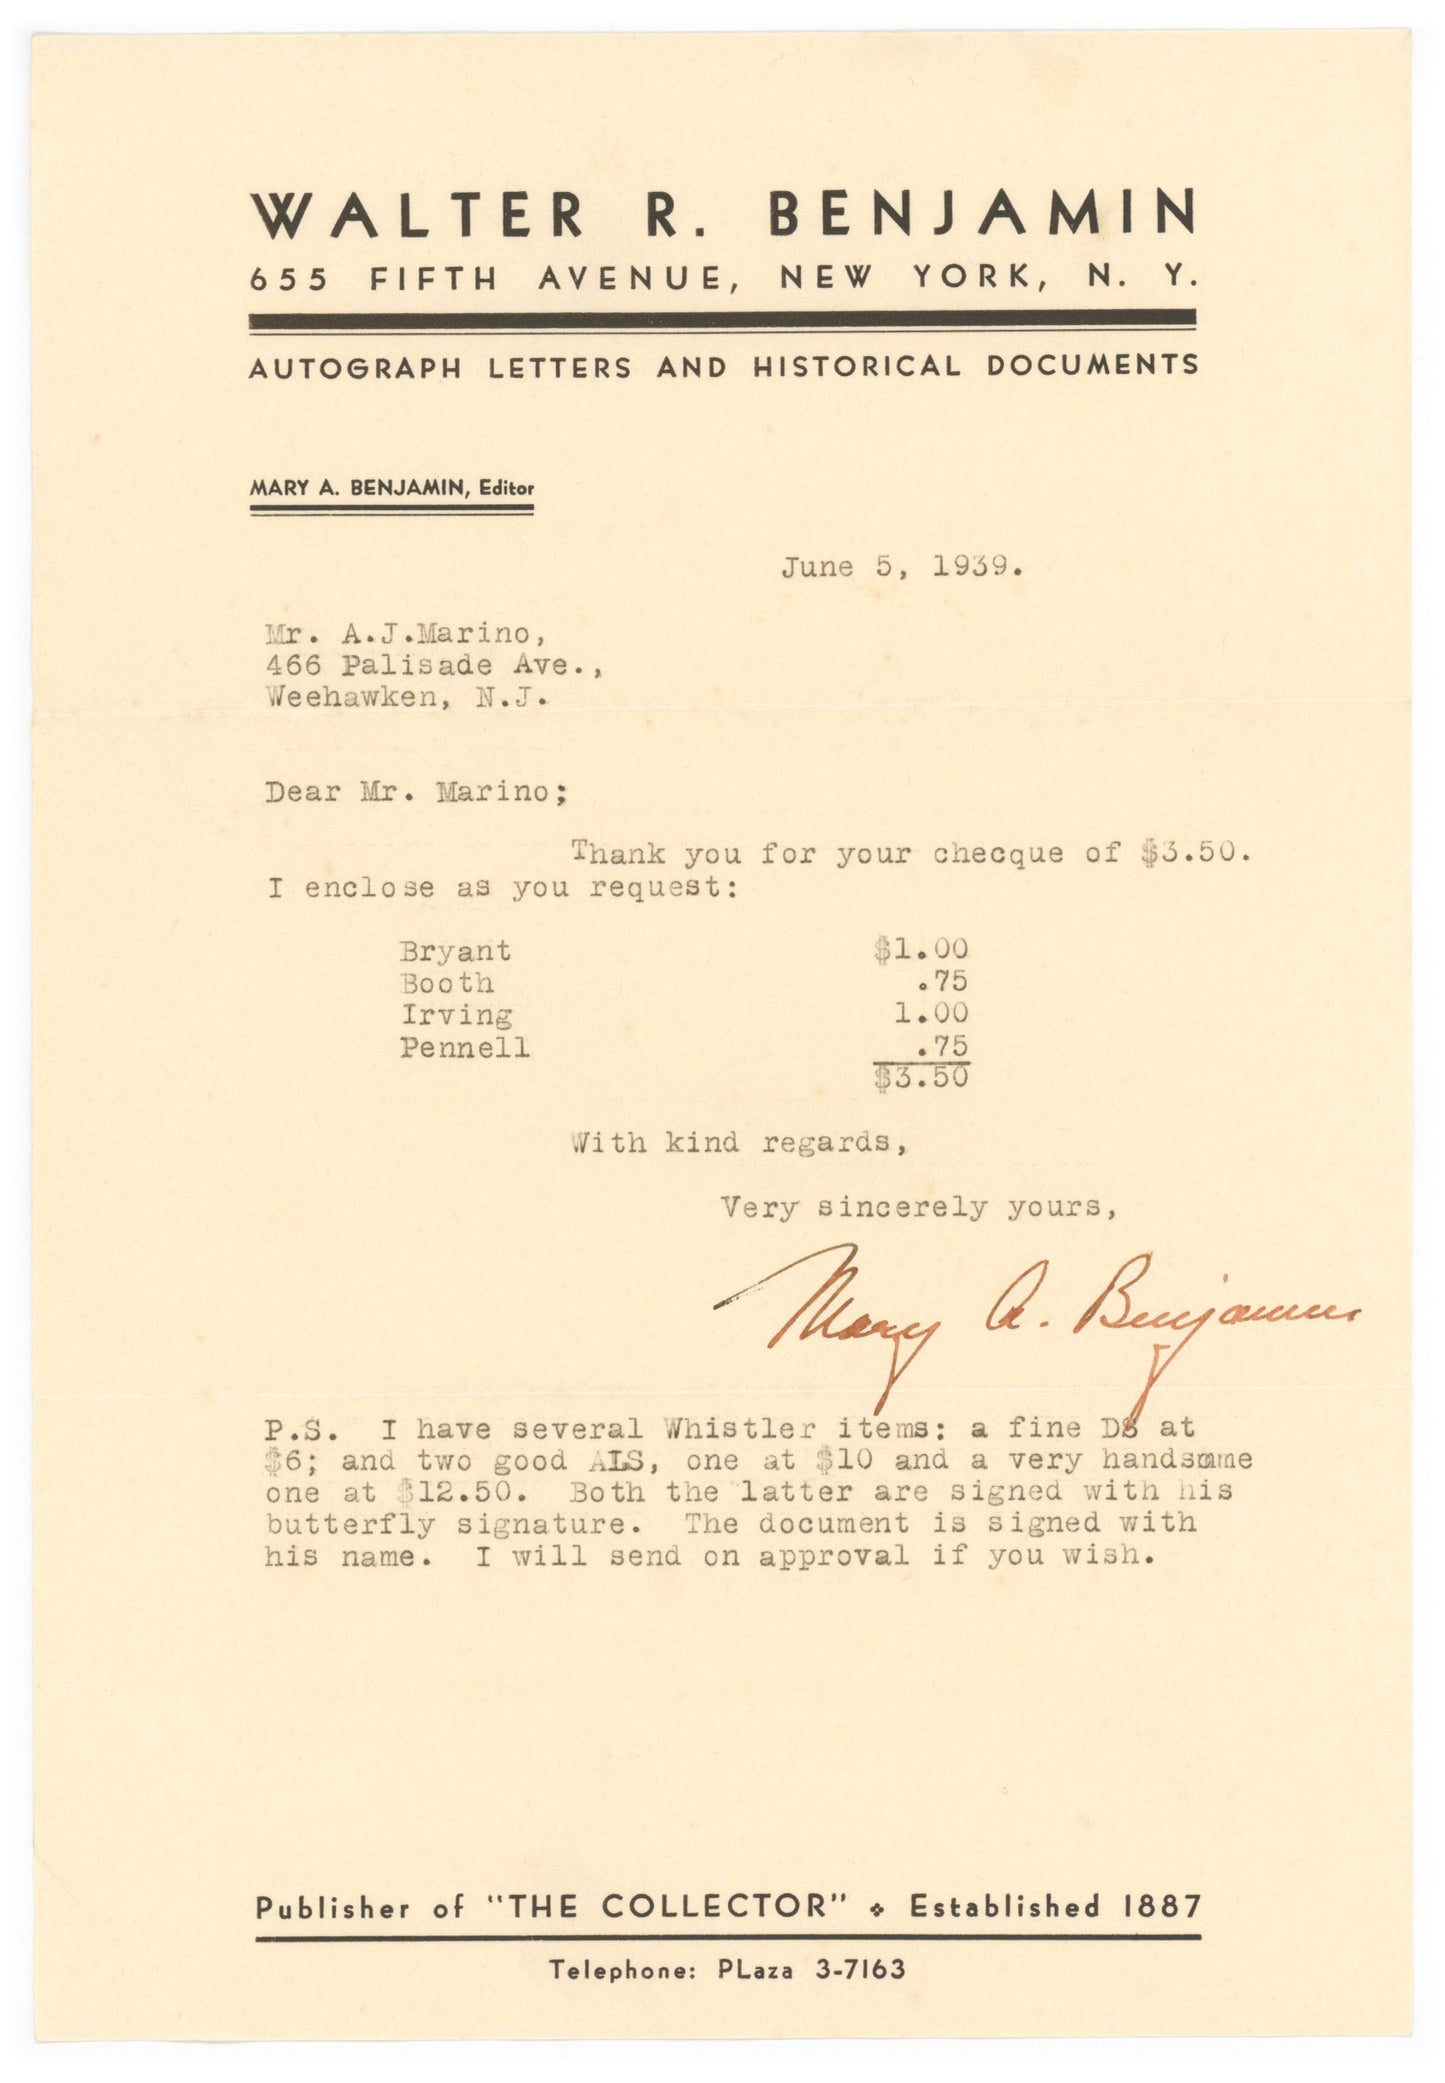 1939 Walter R. Benjamin Receipt - A Time Capsule To Formative Autograph Industry Years